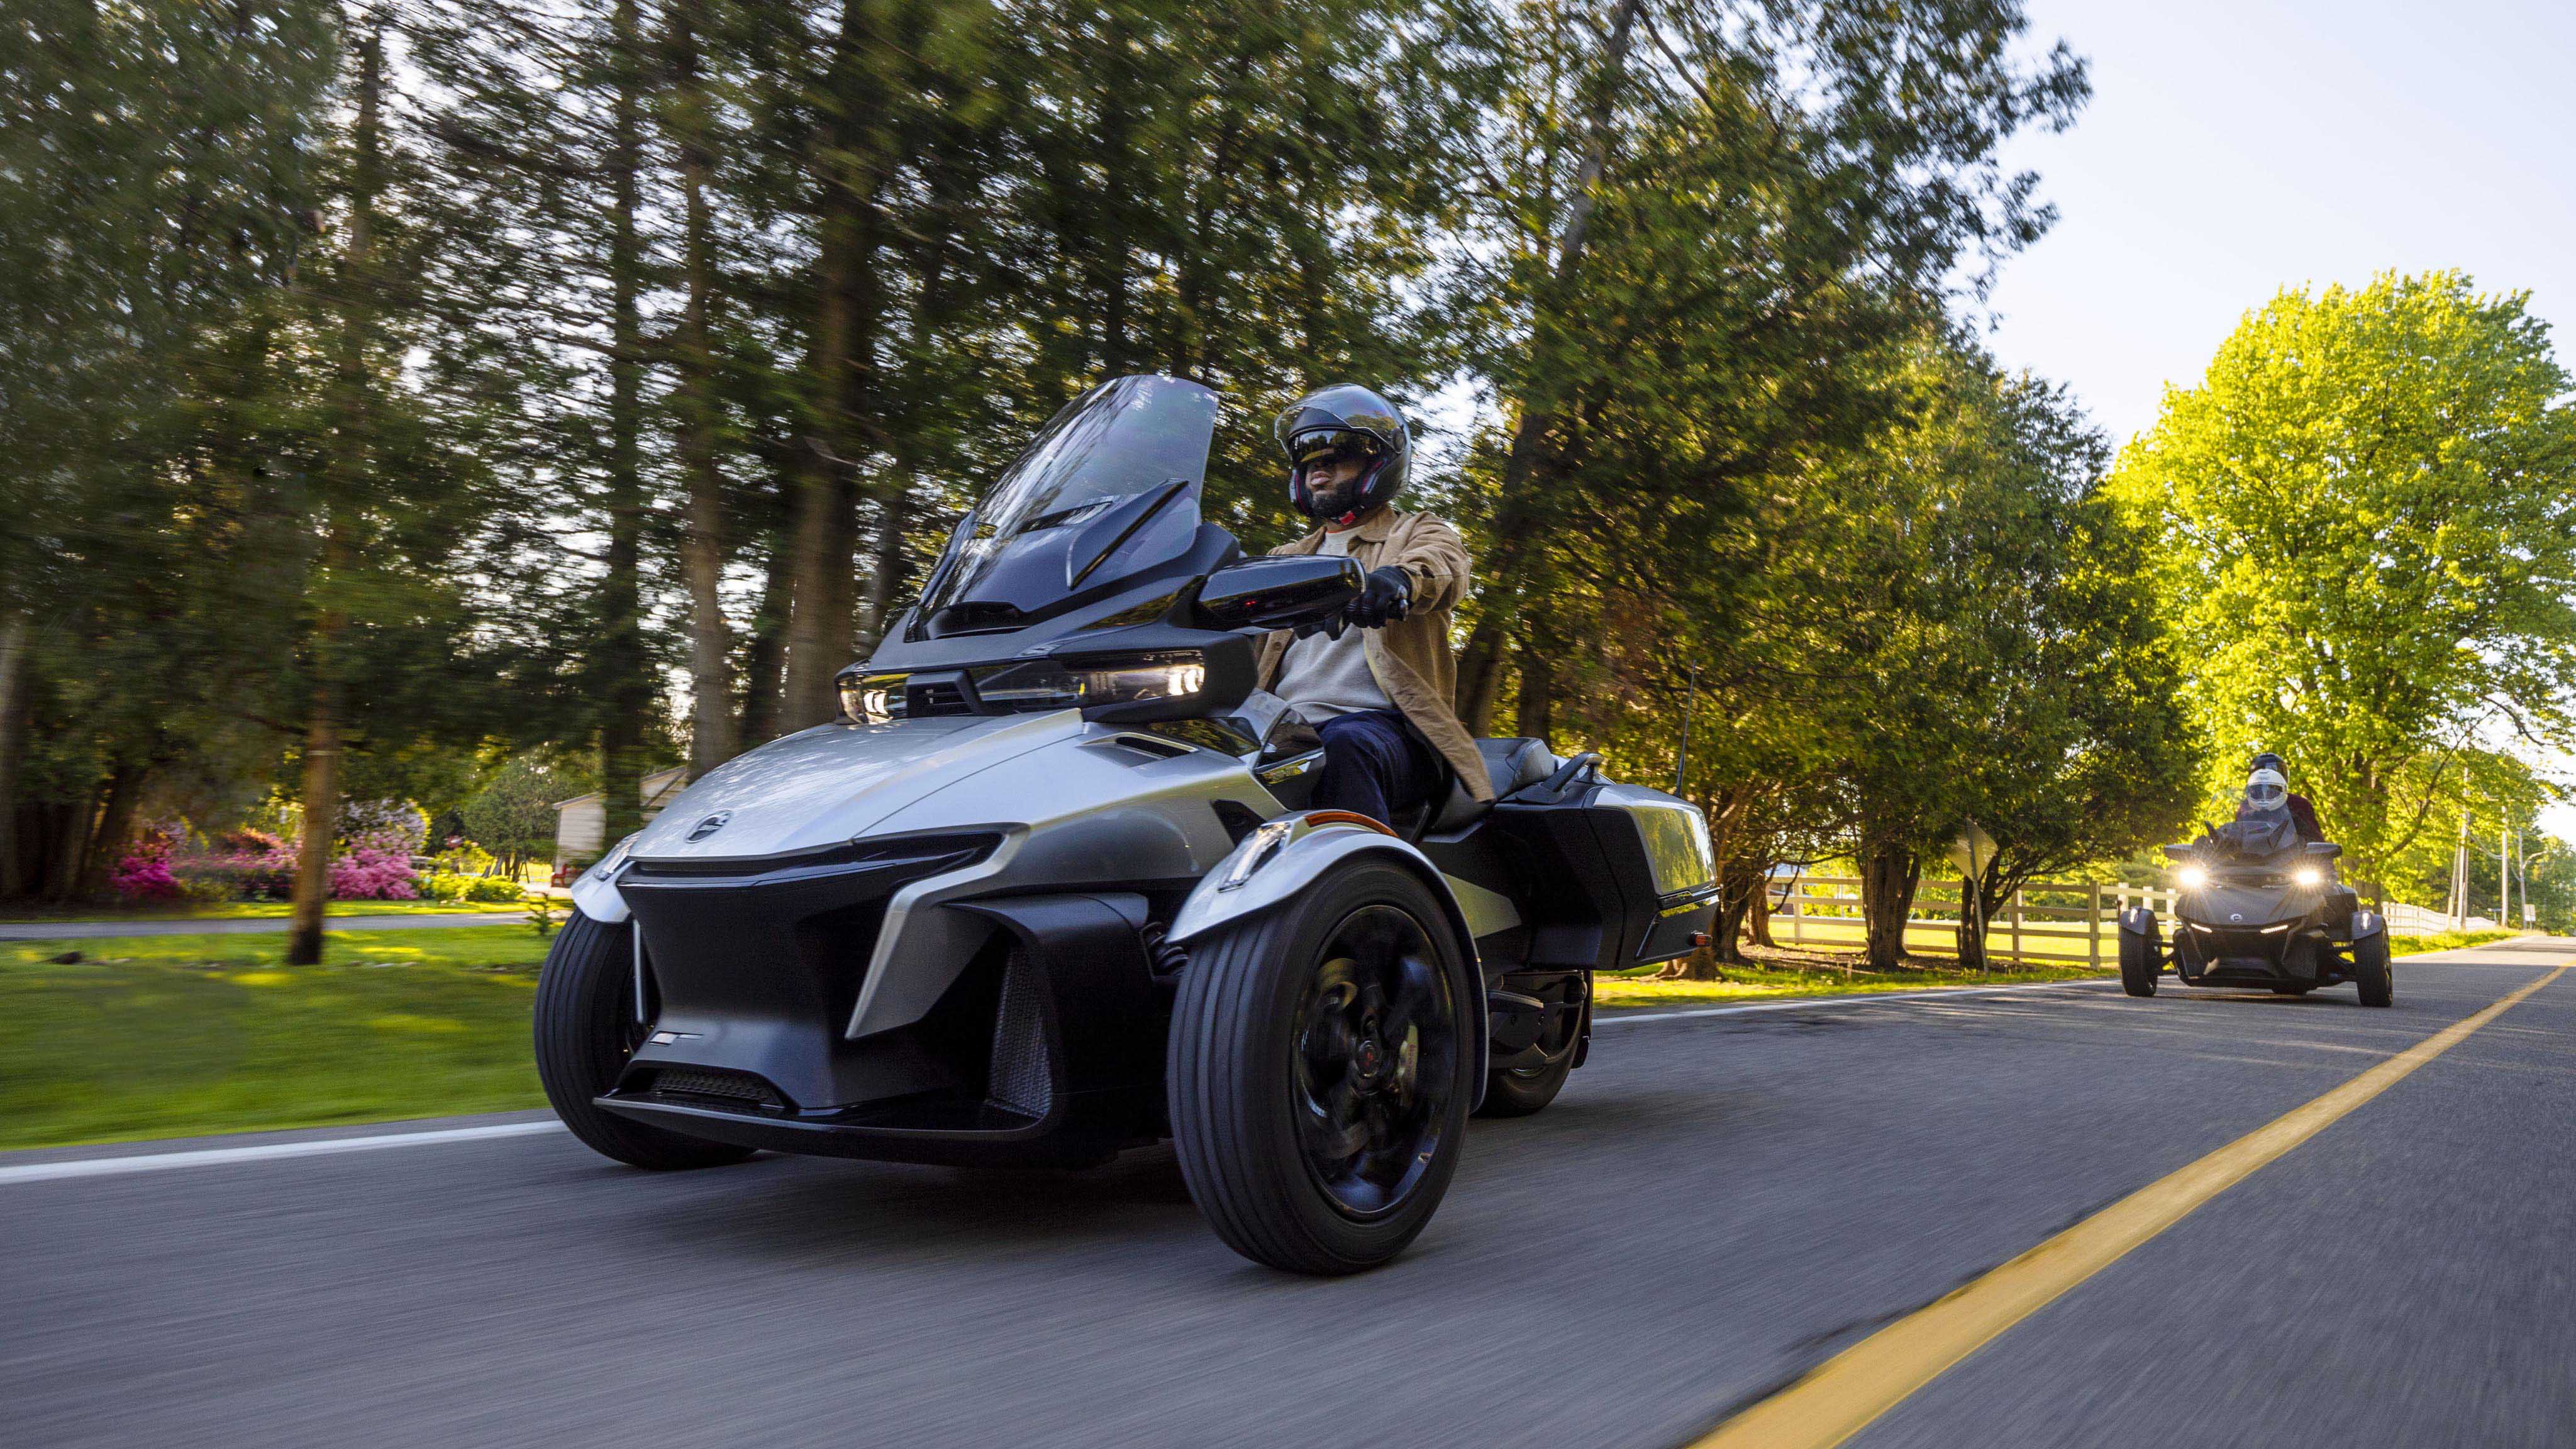 Someone riding a Can-Am Spyder vehicle